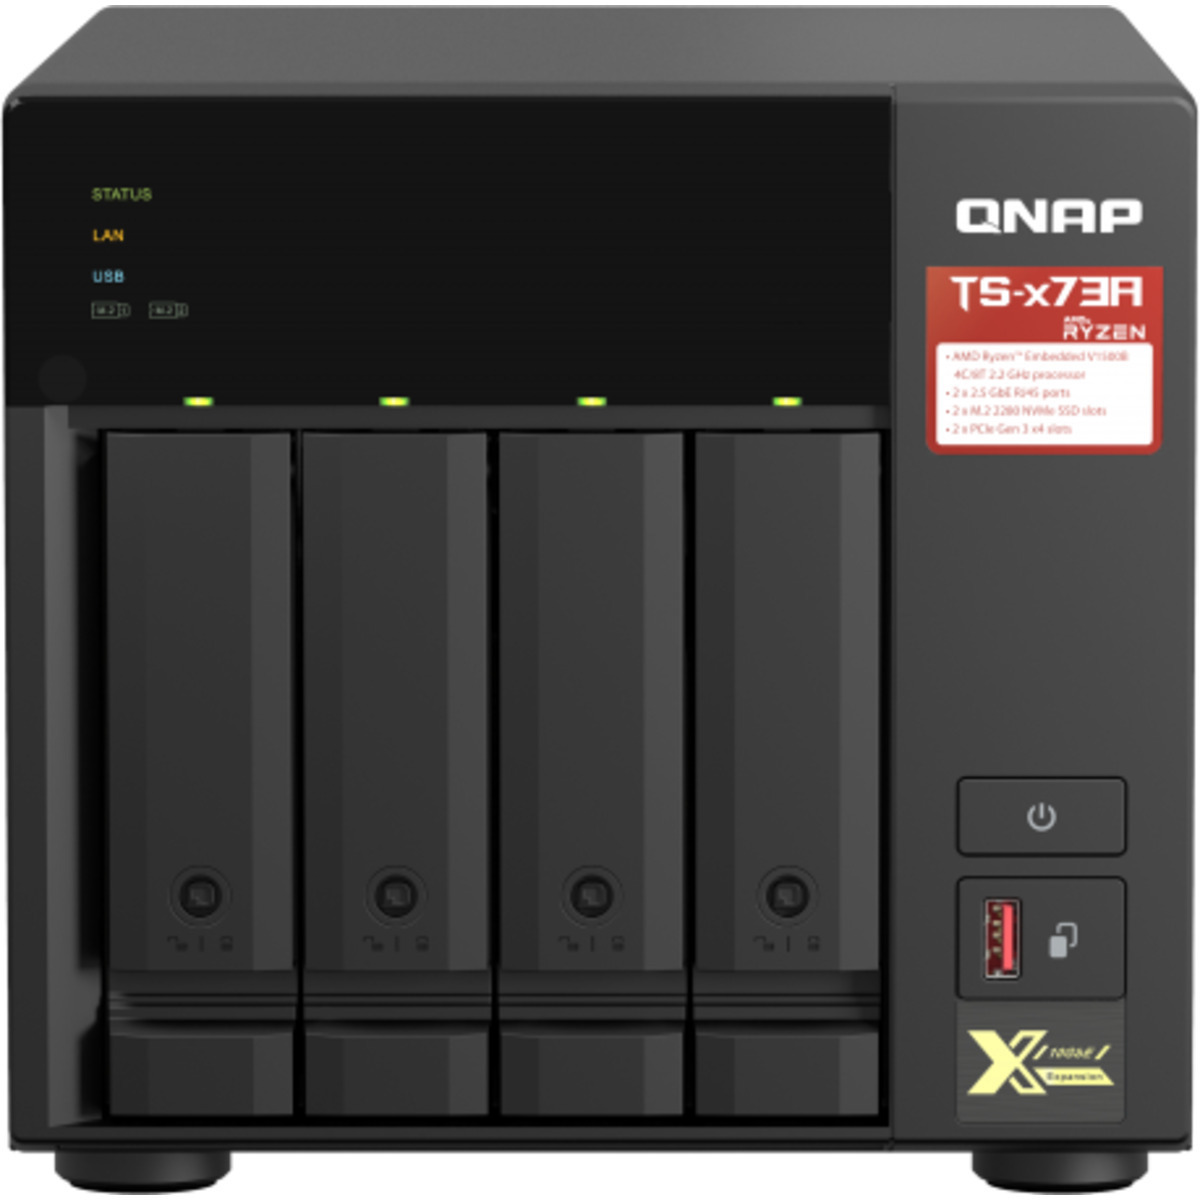 buy $2022 QNAP TS-473A 16tb Desktop NAS - Network Attached Storage Device 4x4000gb Samsung 870 EVO MZ-77E4T0BAM 2.5 560/530MB/s SATA 6Gb/s SSD CONSUMER Class Drives Installed - Burn-In Tested - nas headquarters buy network attached storage server device das new raid-5 free shipping simply usa TS-473A